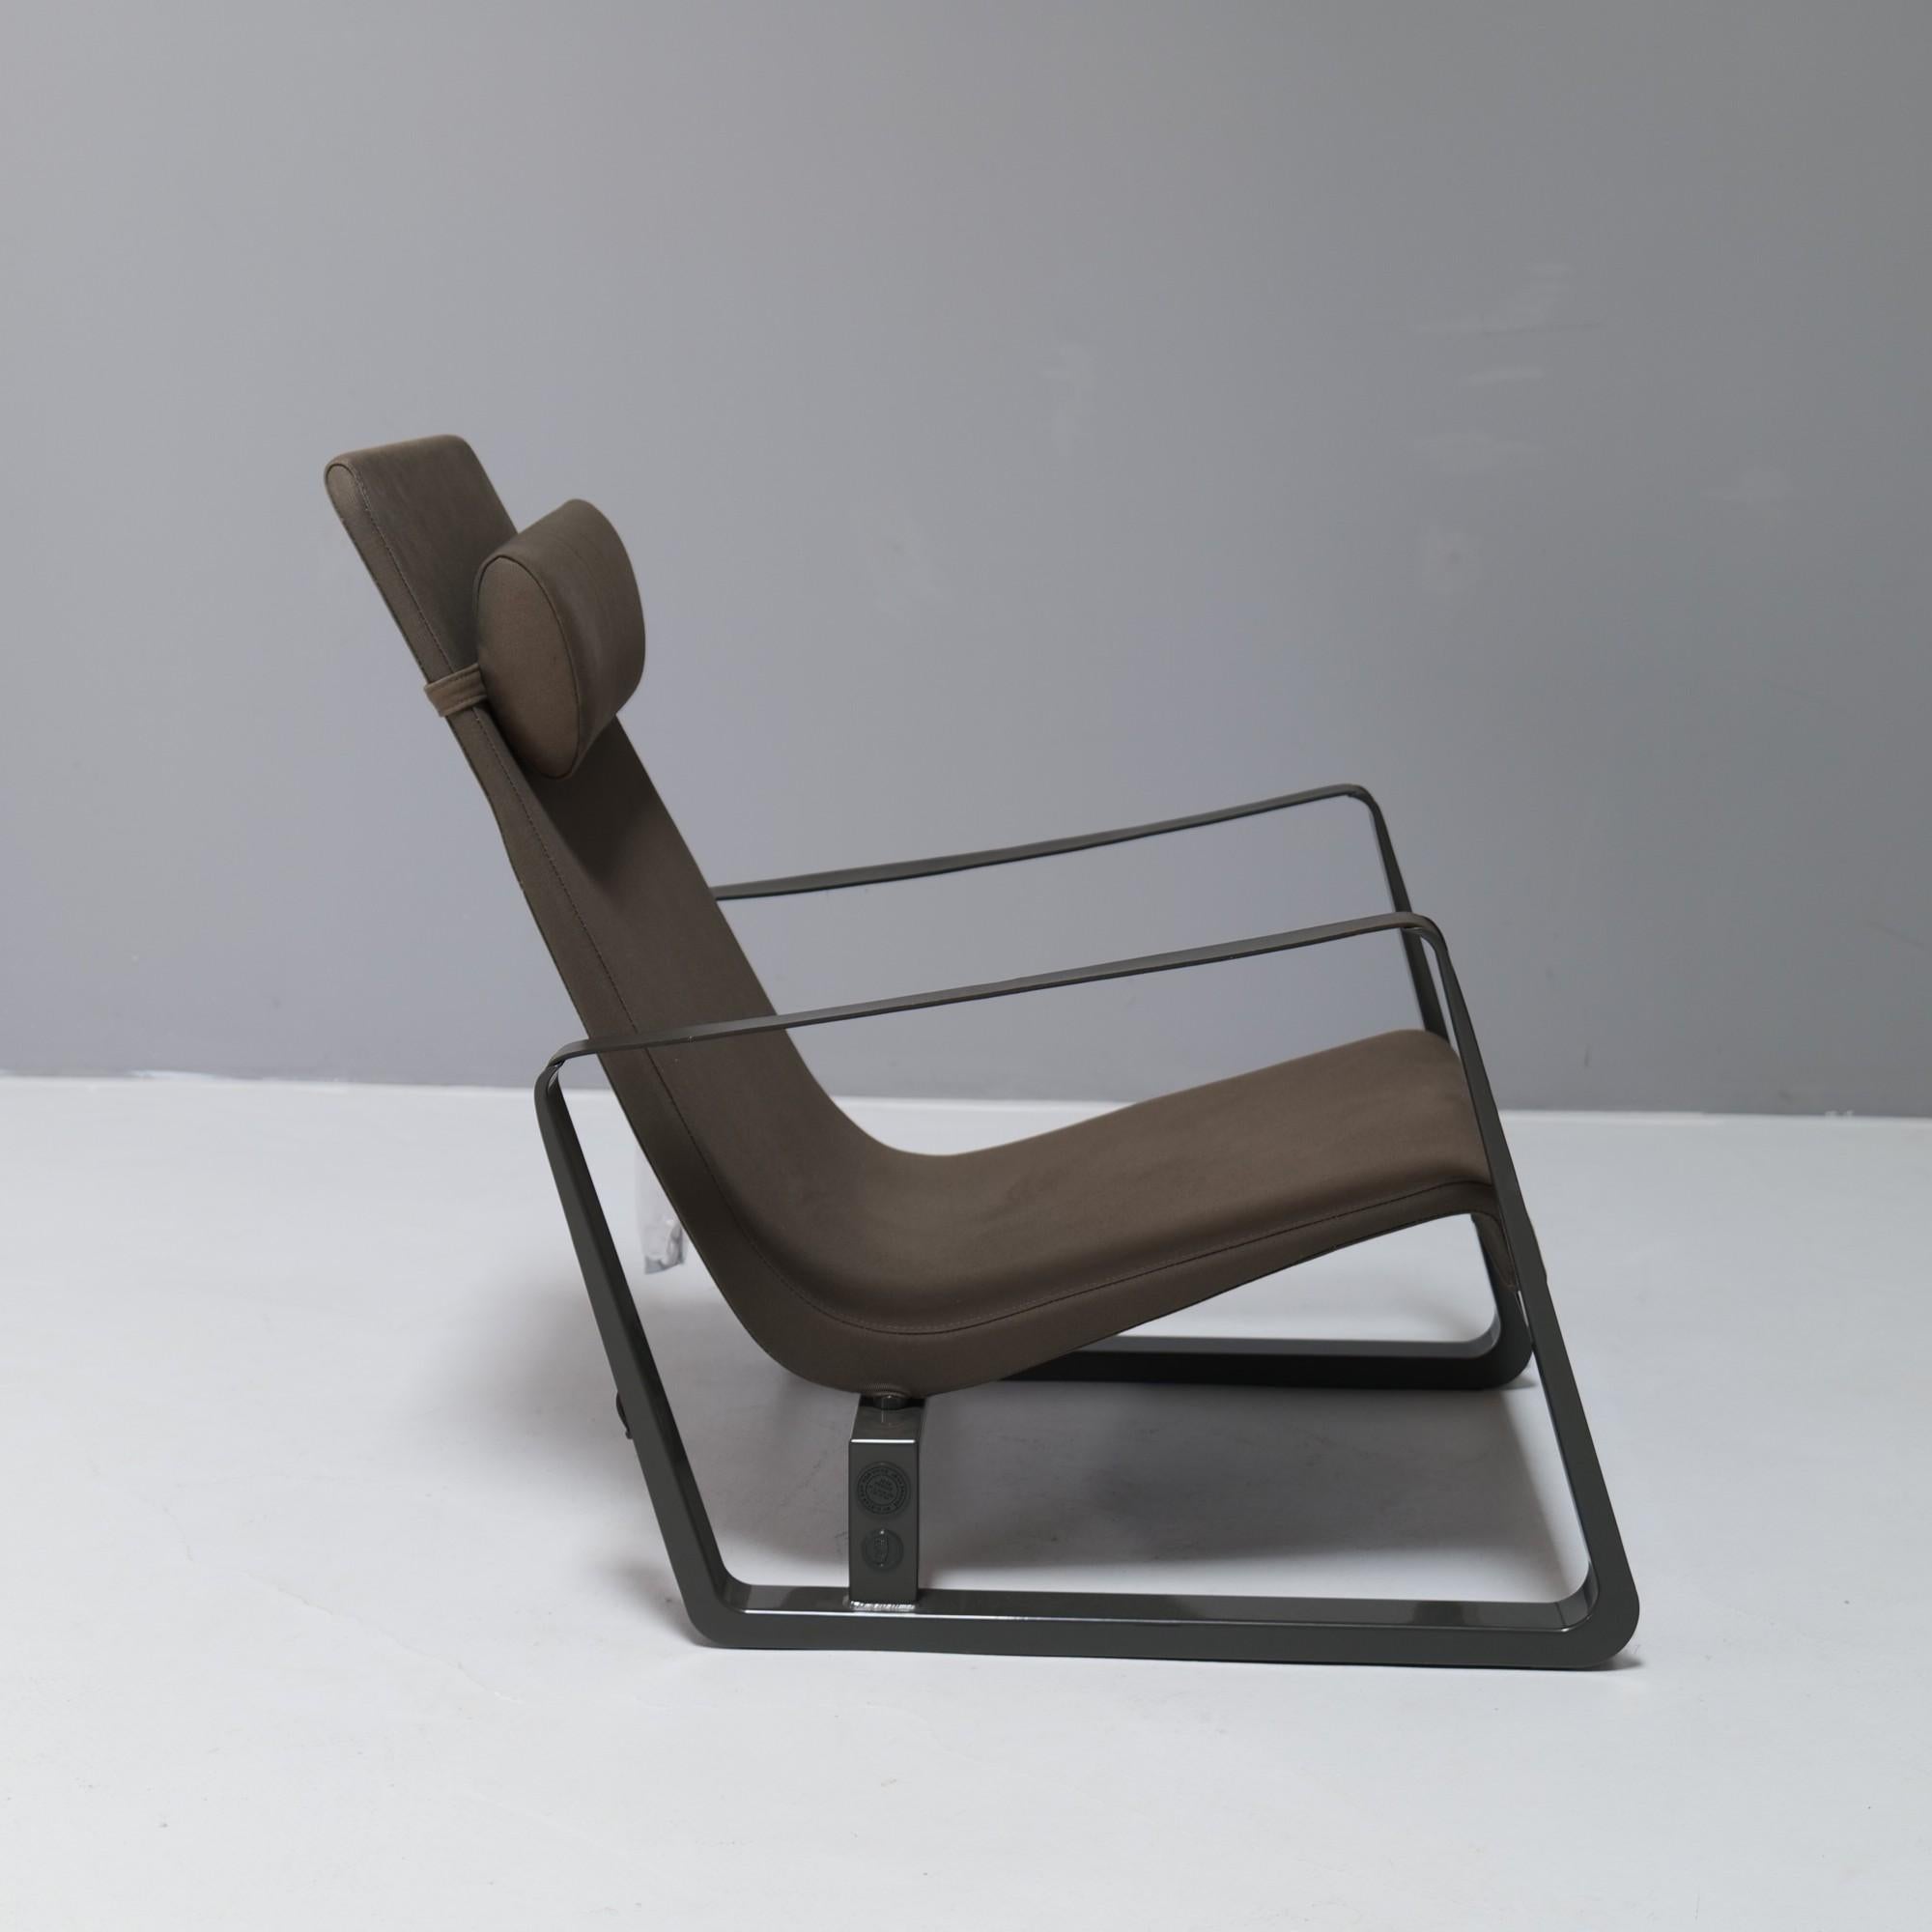 German Limited edition Cité armchair by Jean Prouvé for Vitra x G-Star Raw #50